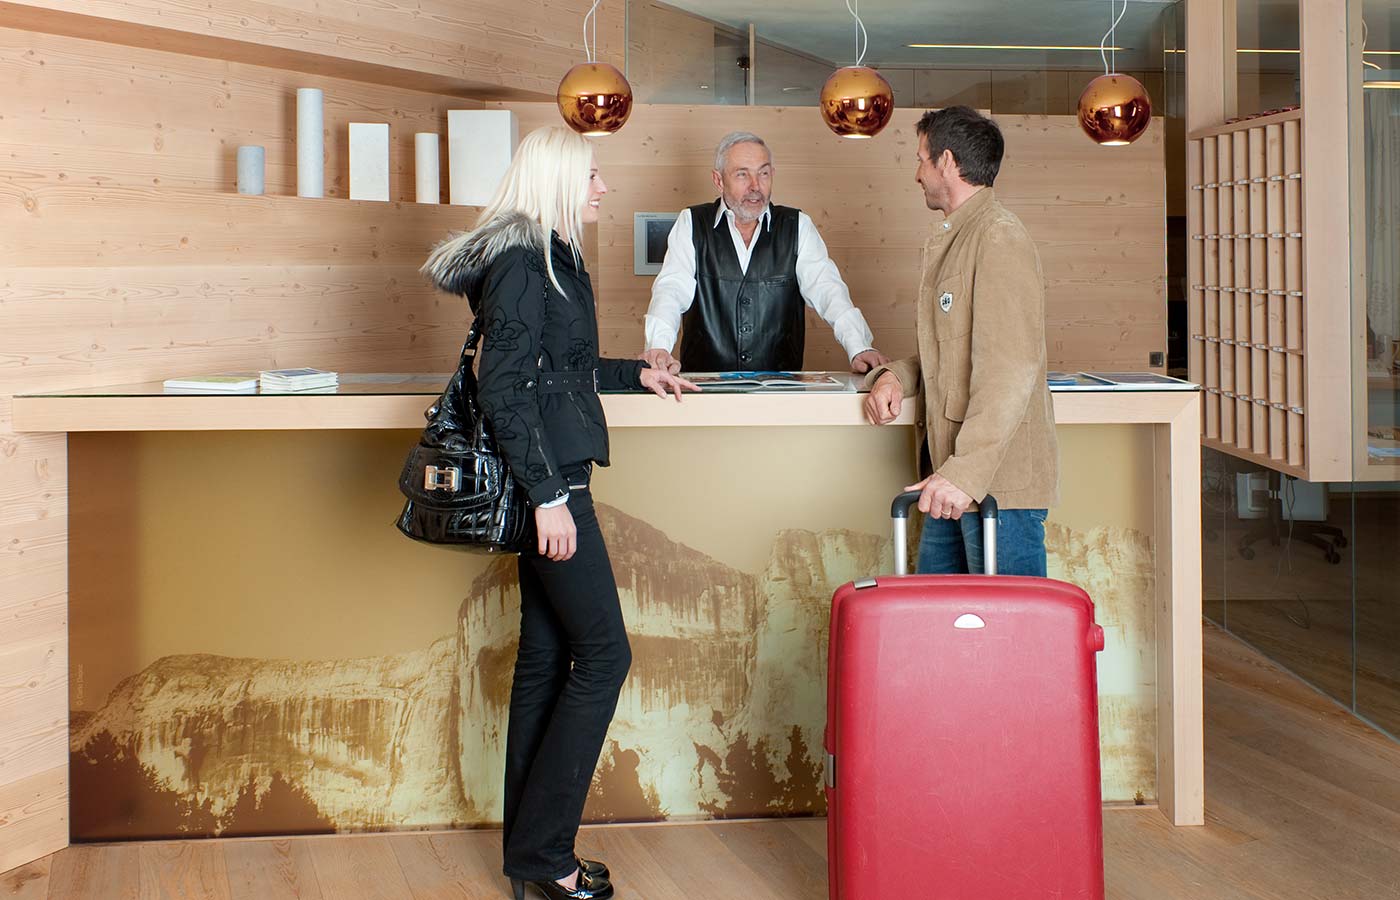 Two guests at check-in of Hotel Cavallino